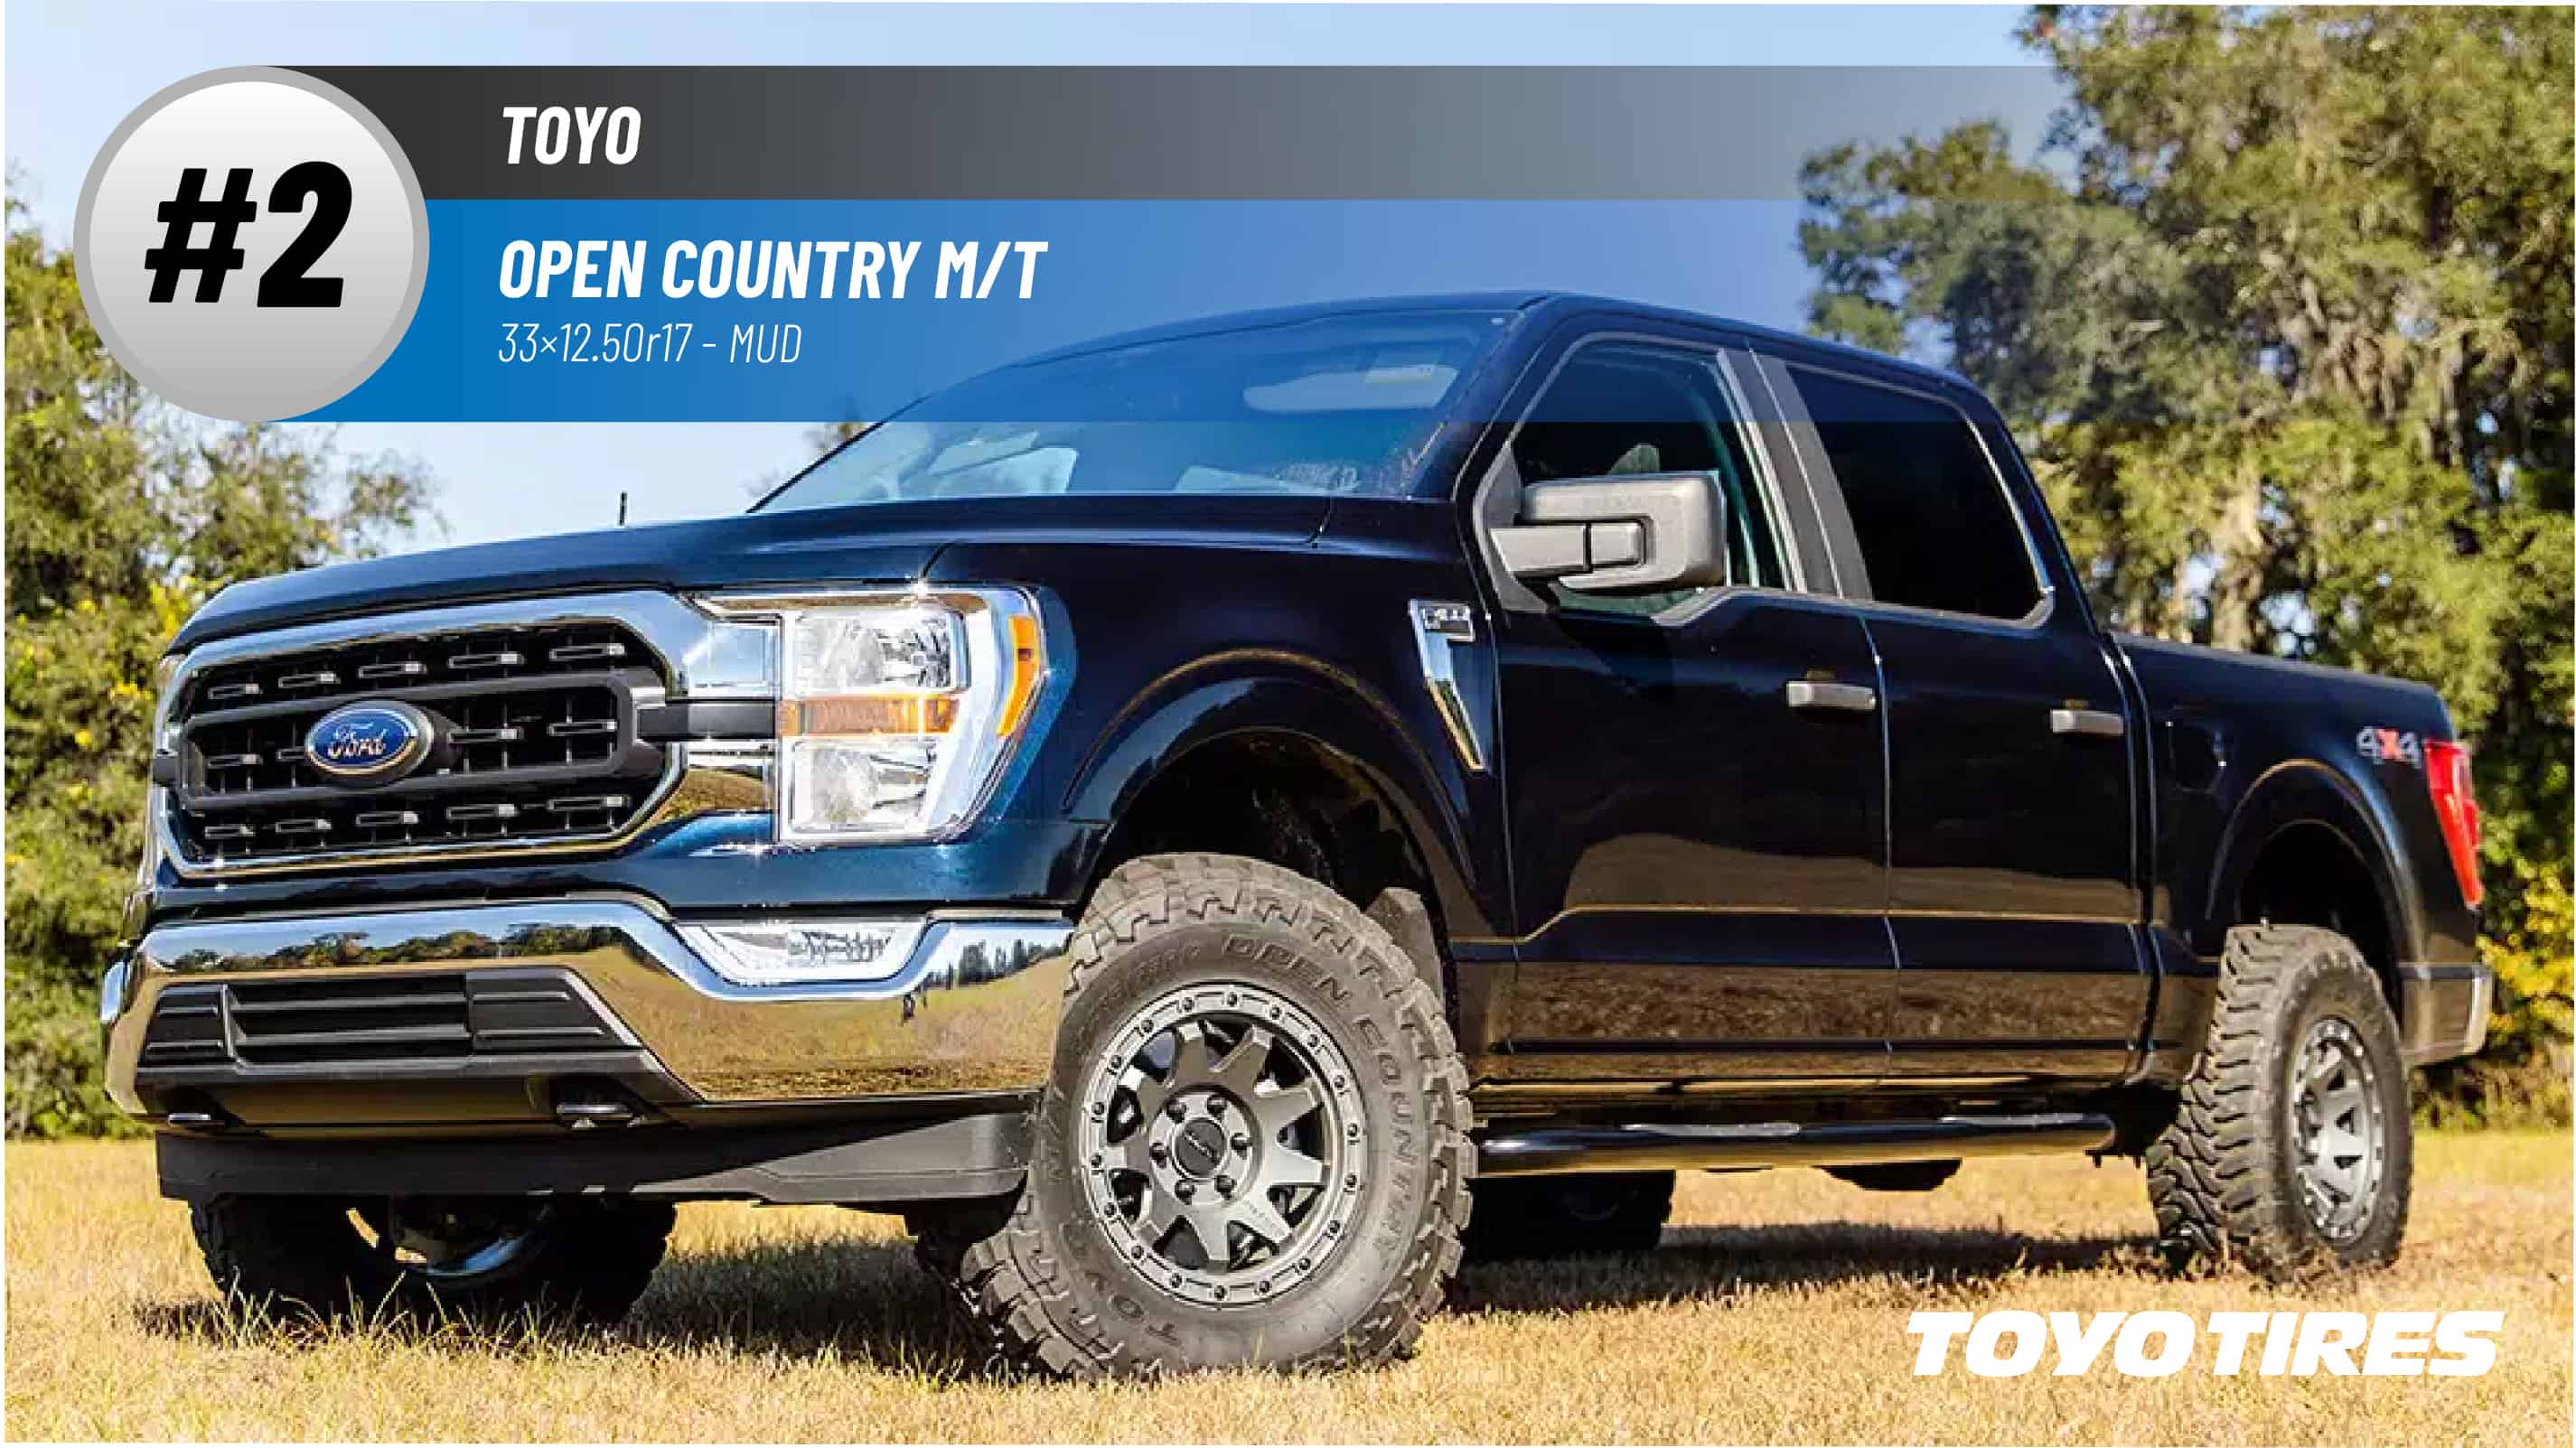 Top #2 Mud Tires: Toyo Open Country M/T – 33x 12.50 r17